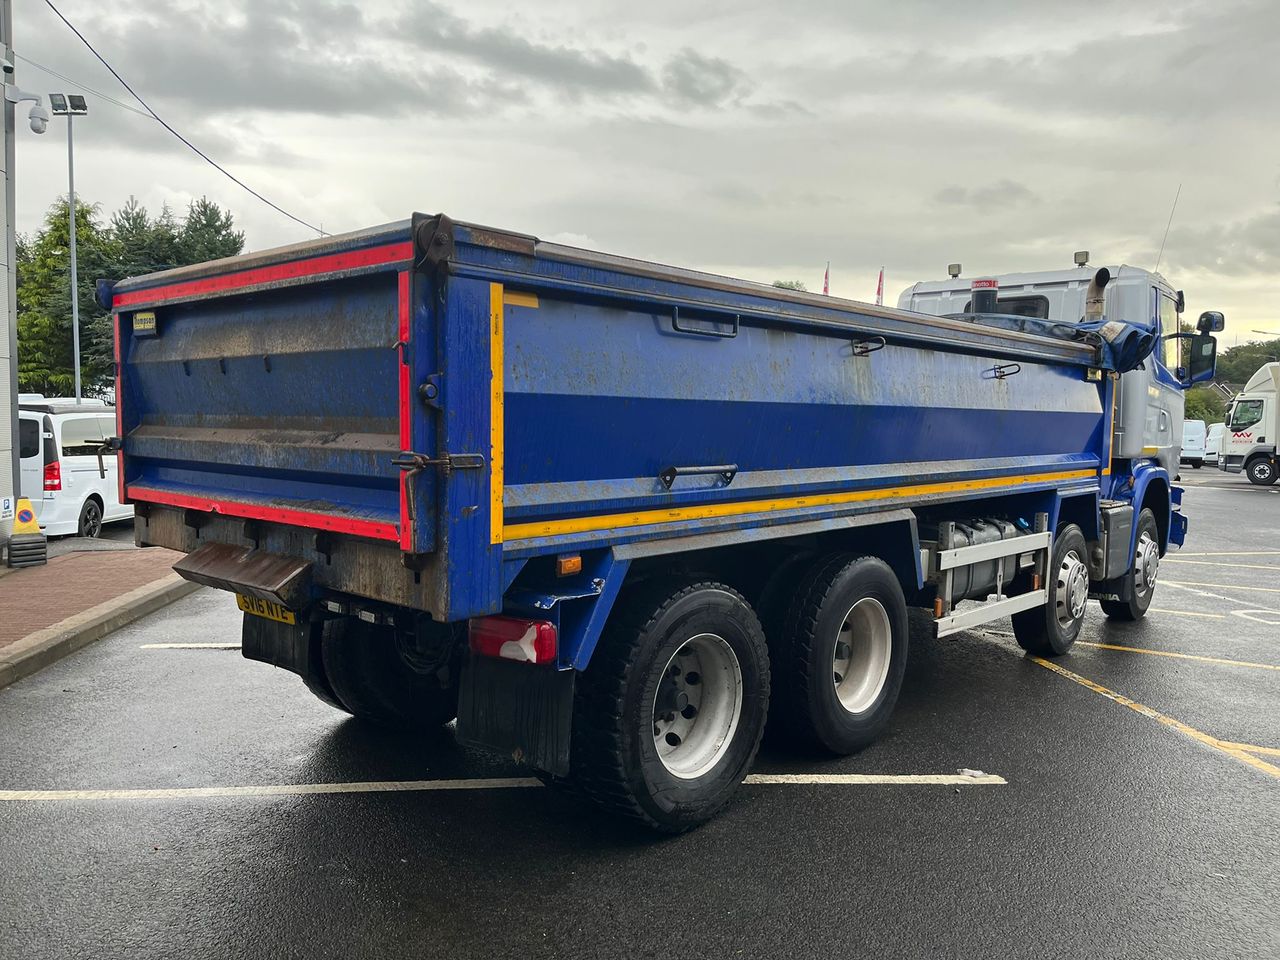 Ready to go Scania G450, Tipper, 450, 32 Tonne, Day Cab, 8-Speed Manual Gearbox, Easy Sheet System, Alloy Wheels, Air Tailgate, Binotto Ram, Beacons, , -, - | for sale at MV Commercial, the UKs leading Truck, Trailers and Van supplier. (SV16NTE 89056)